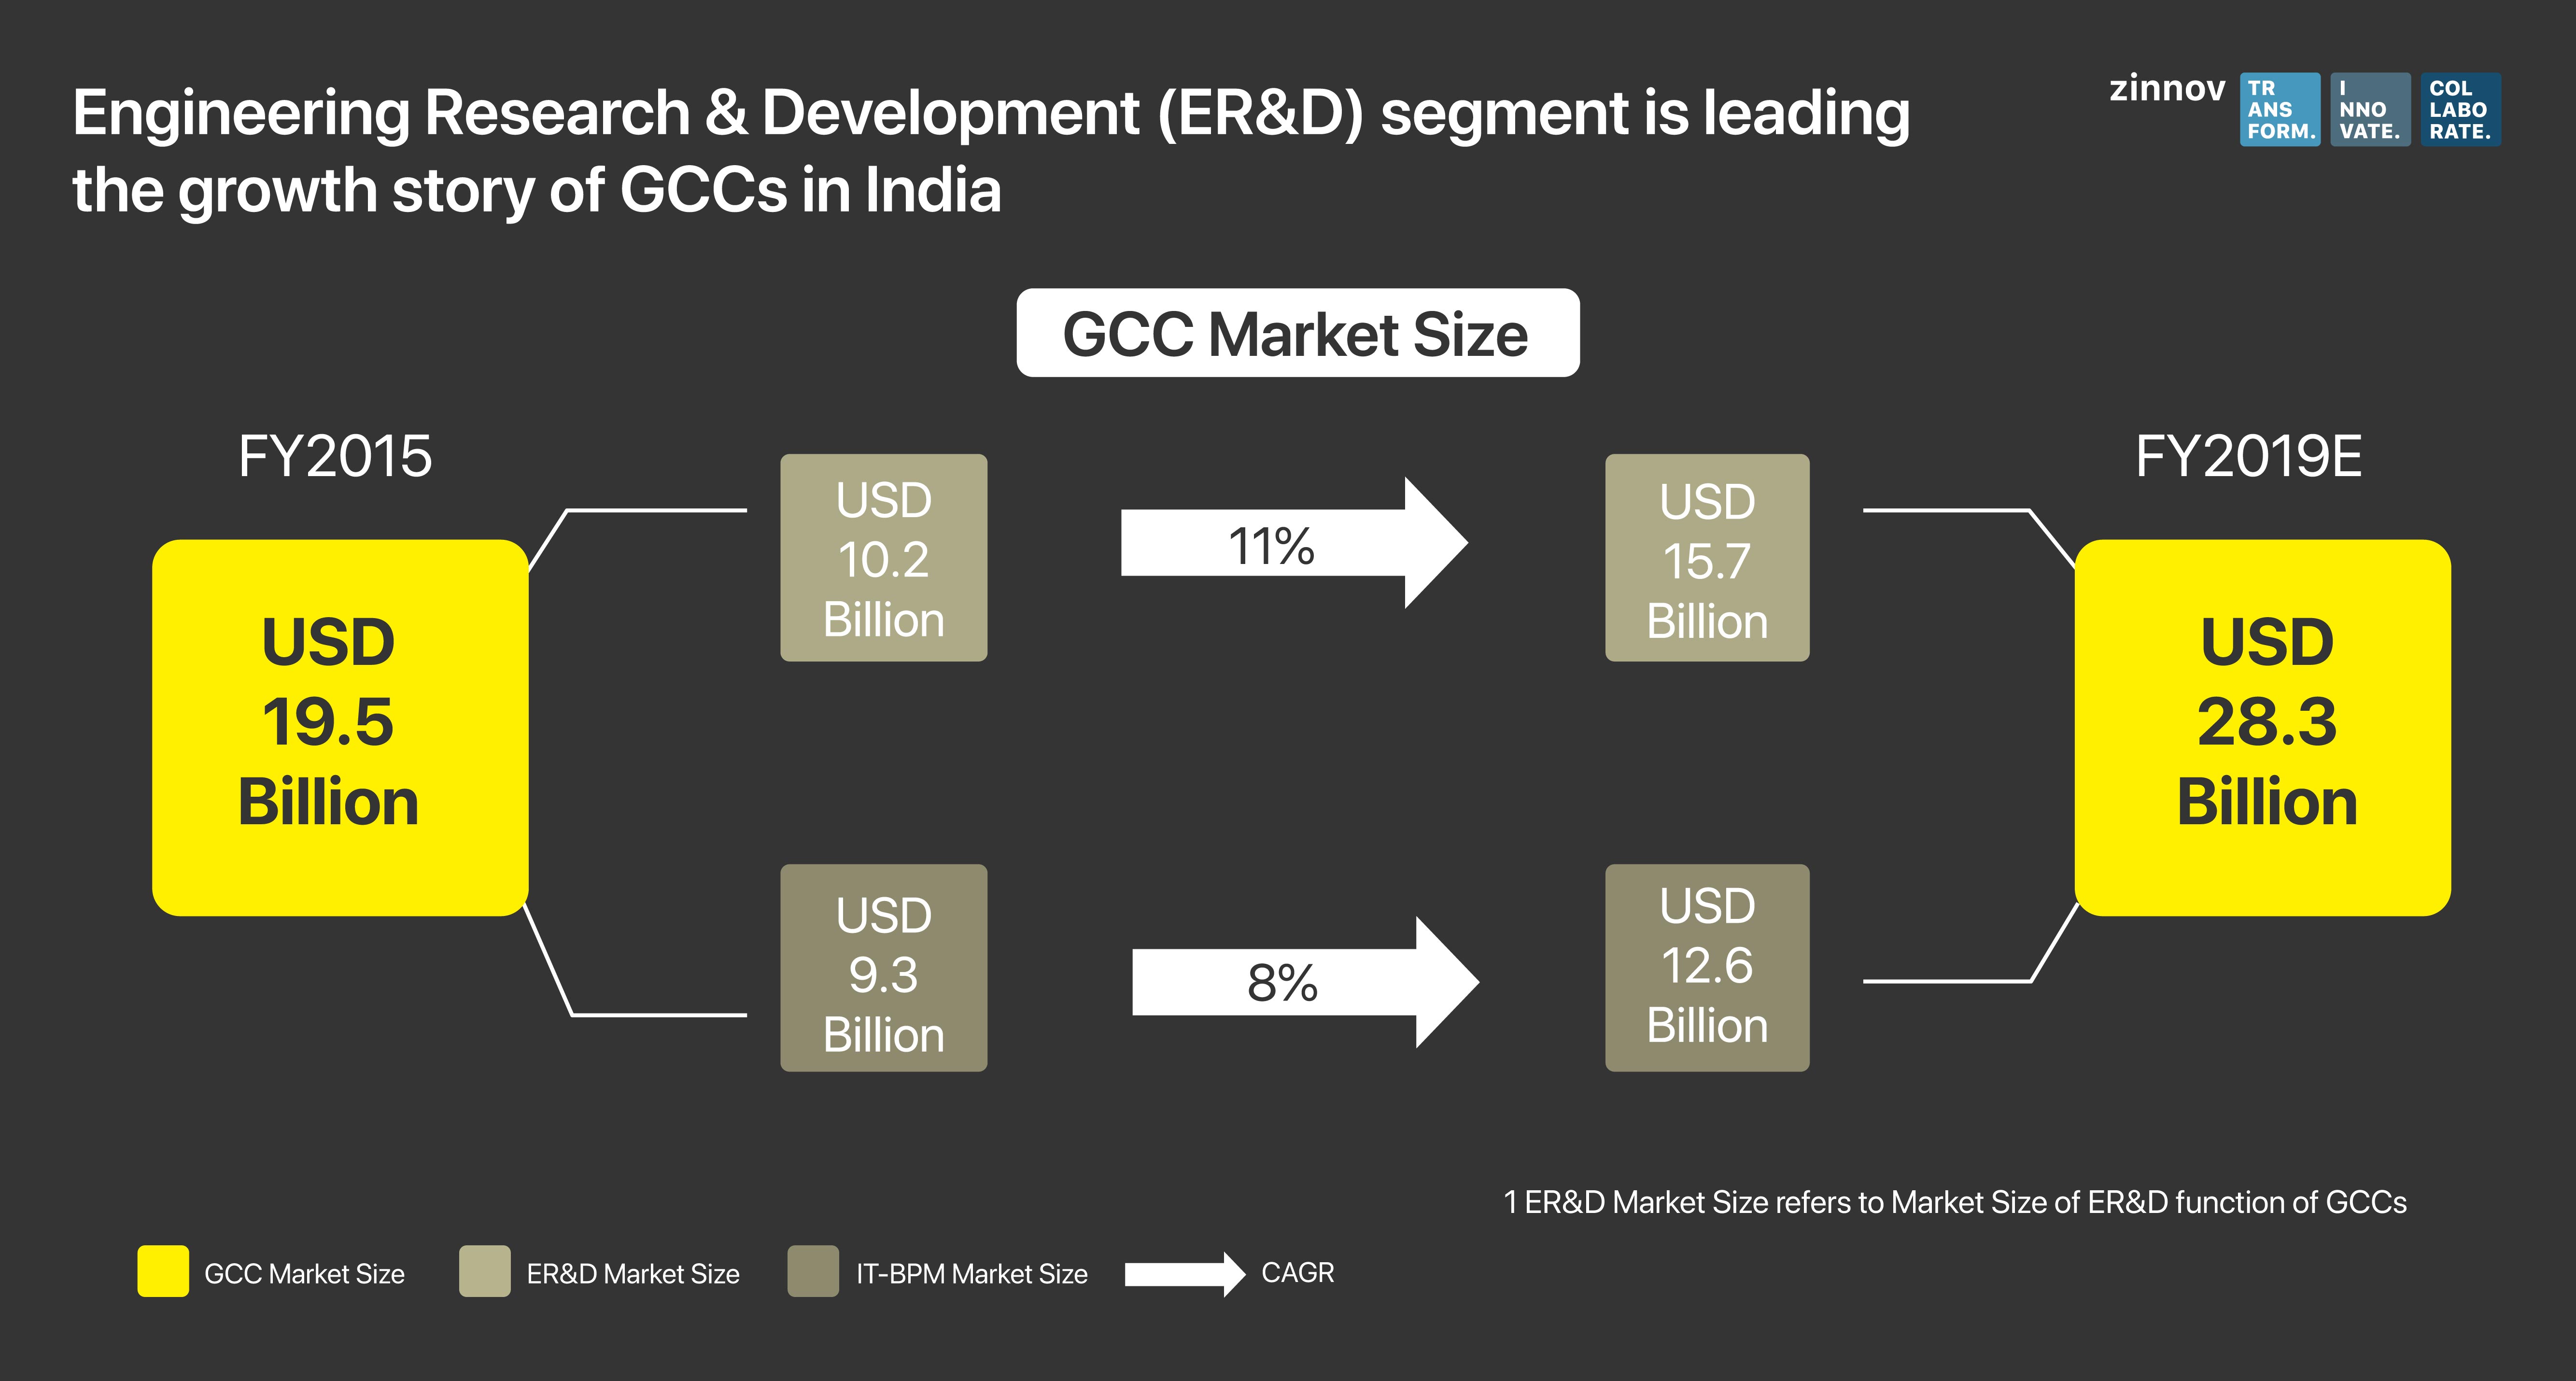 ER&D segment is leading the growth story of GCC in India